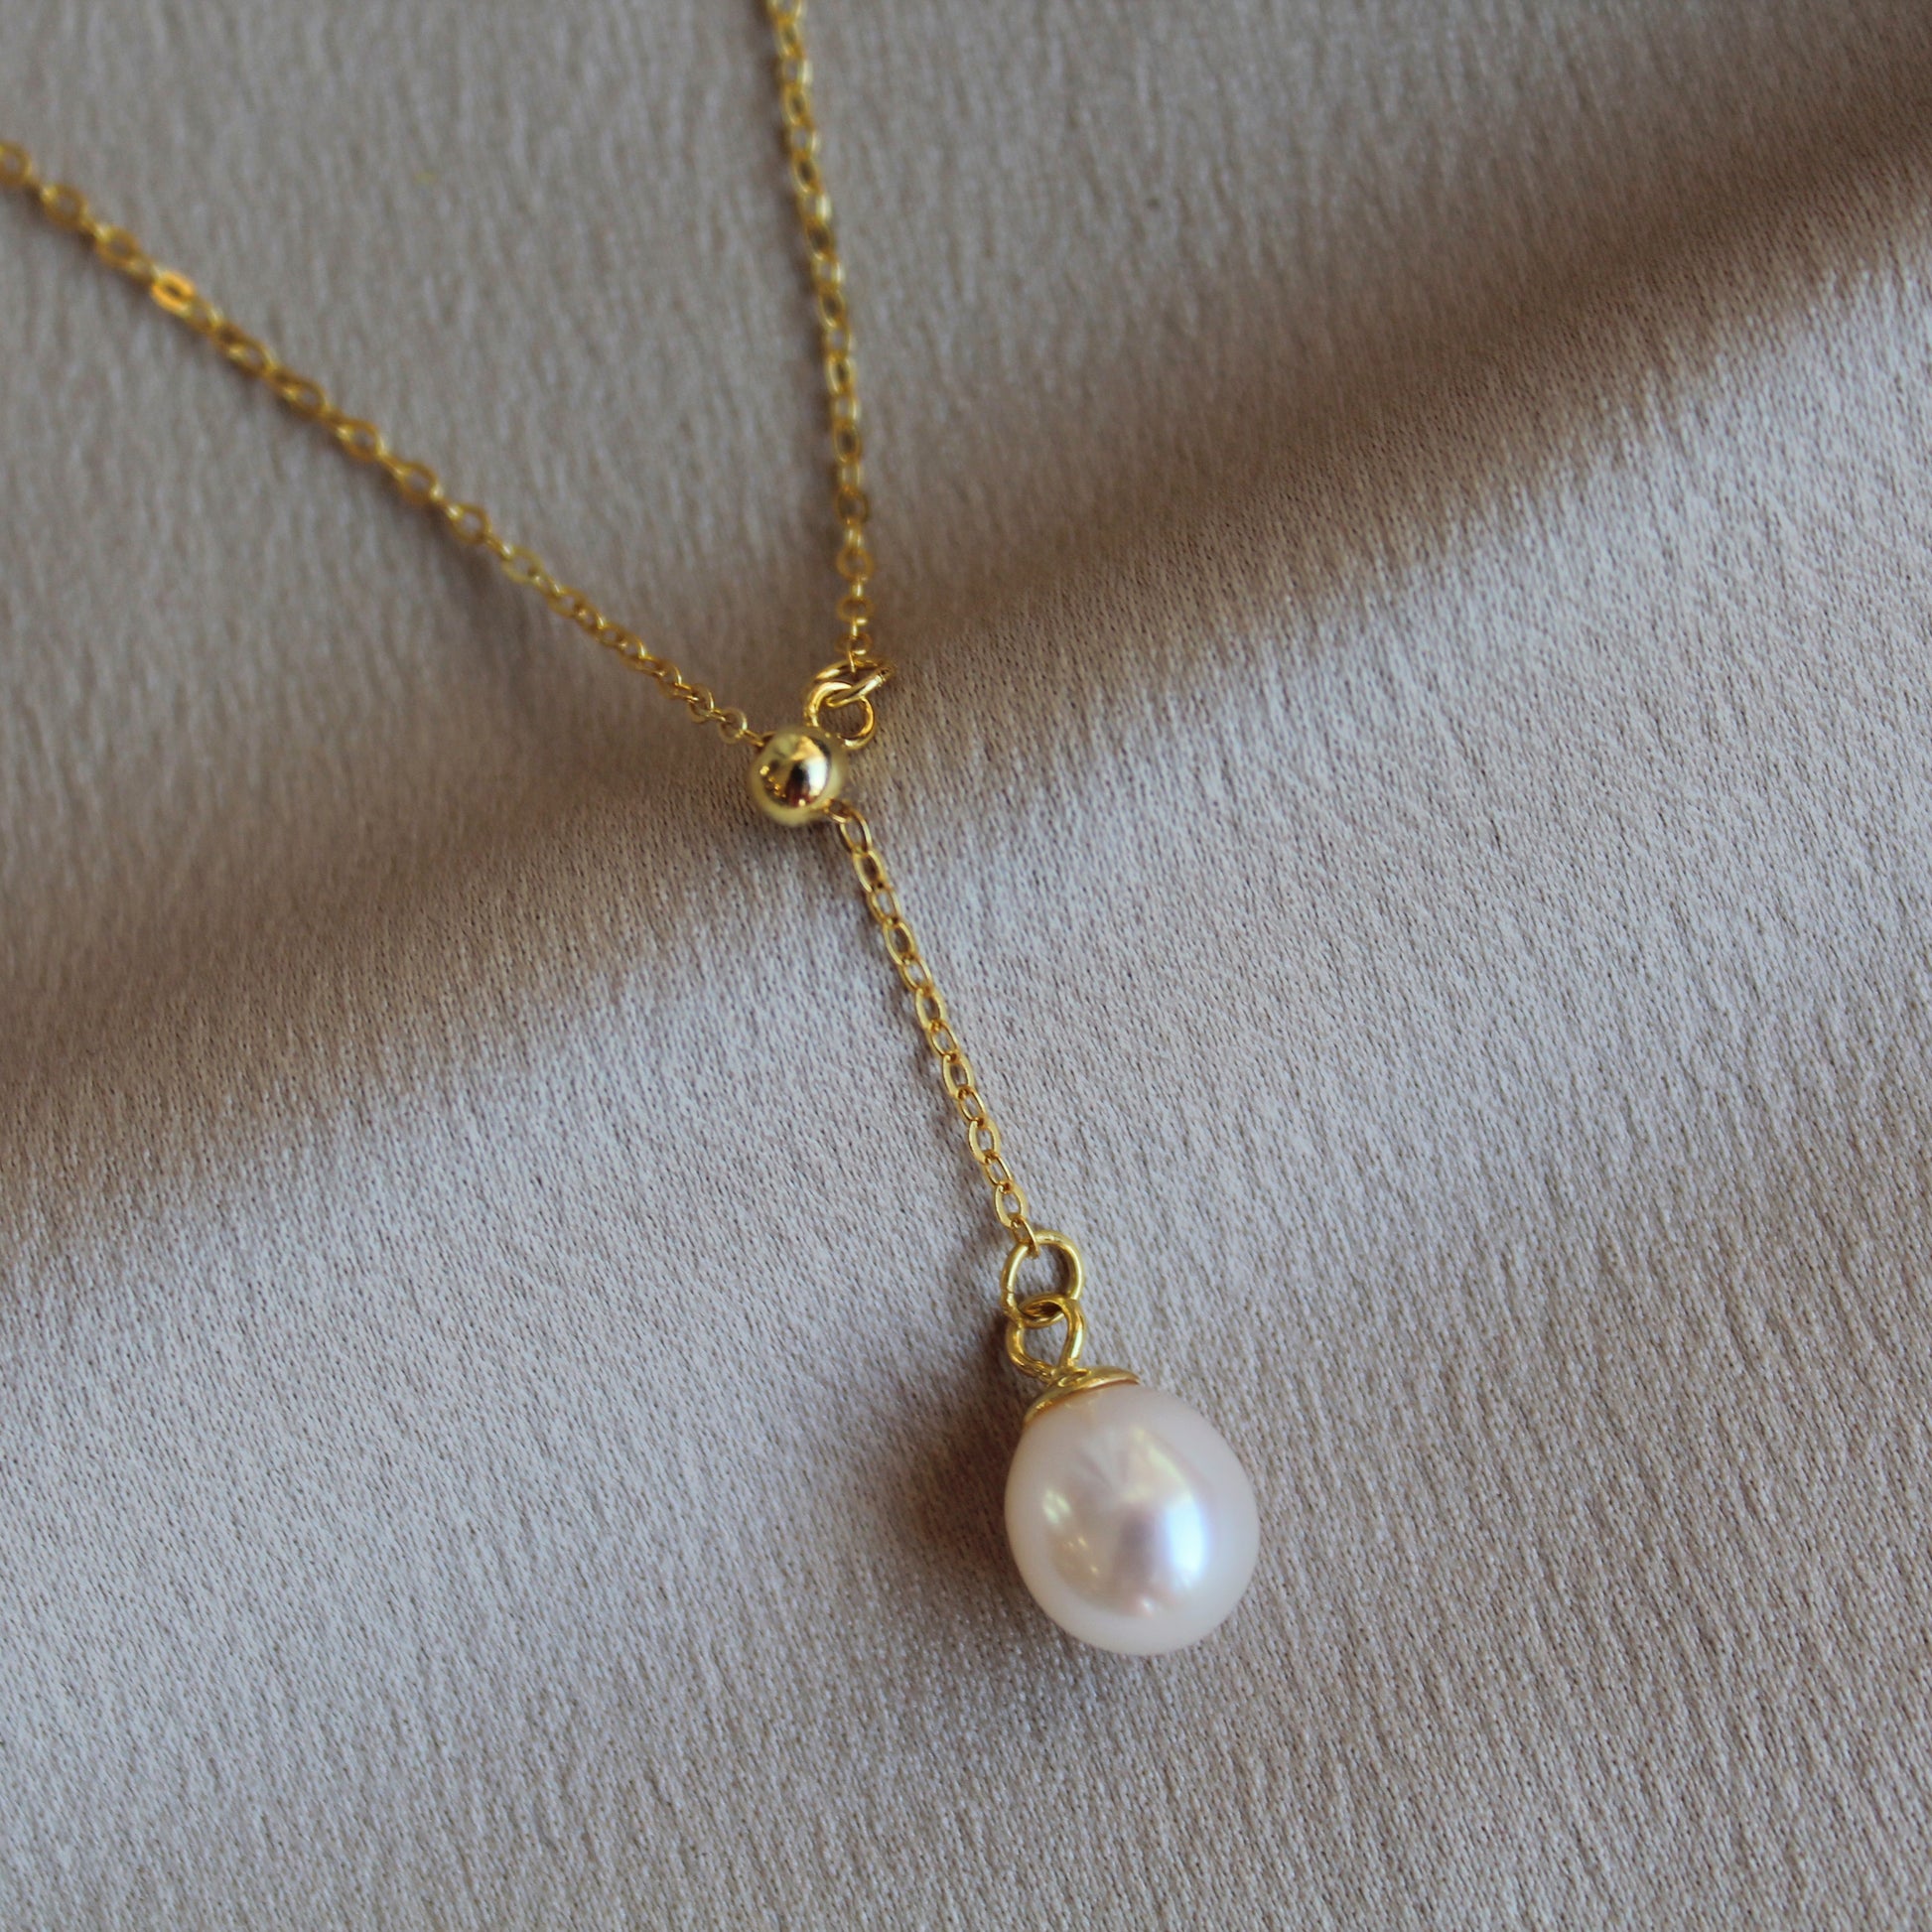 Freshwater rice pearl necklace (18k gold plated sterling silver)